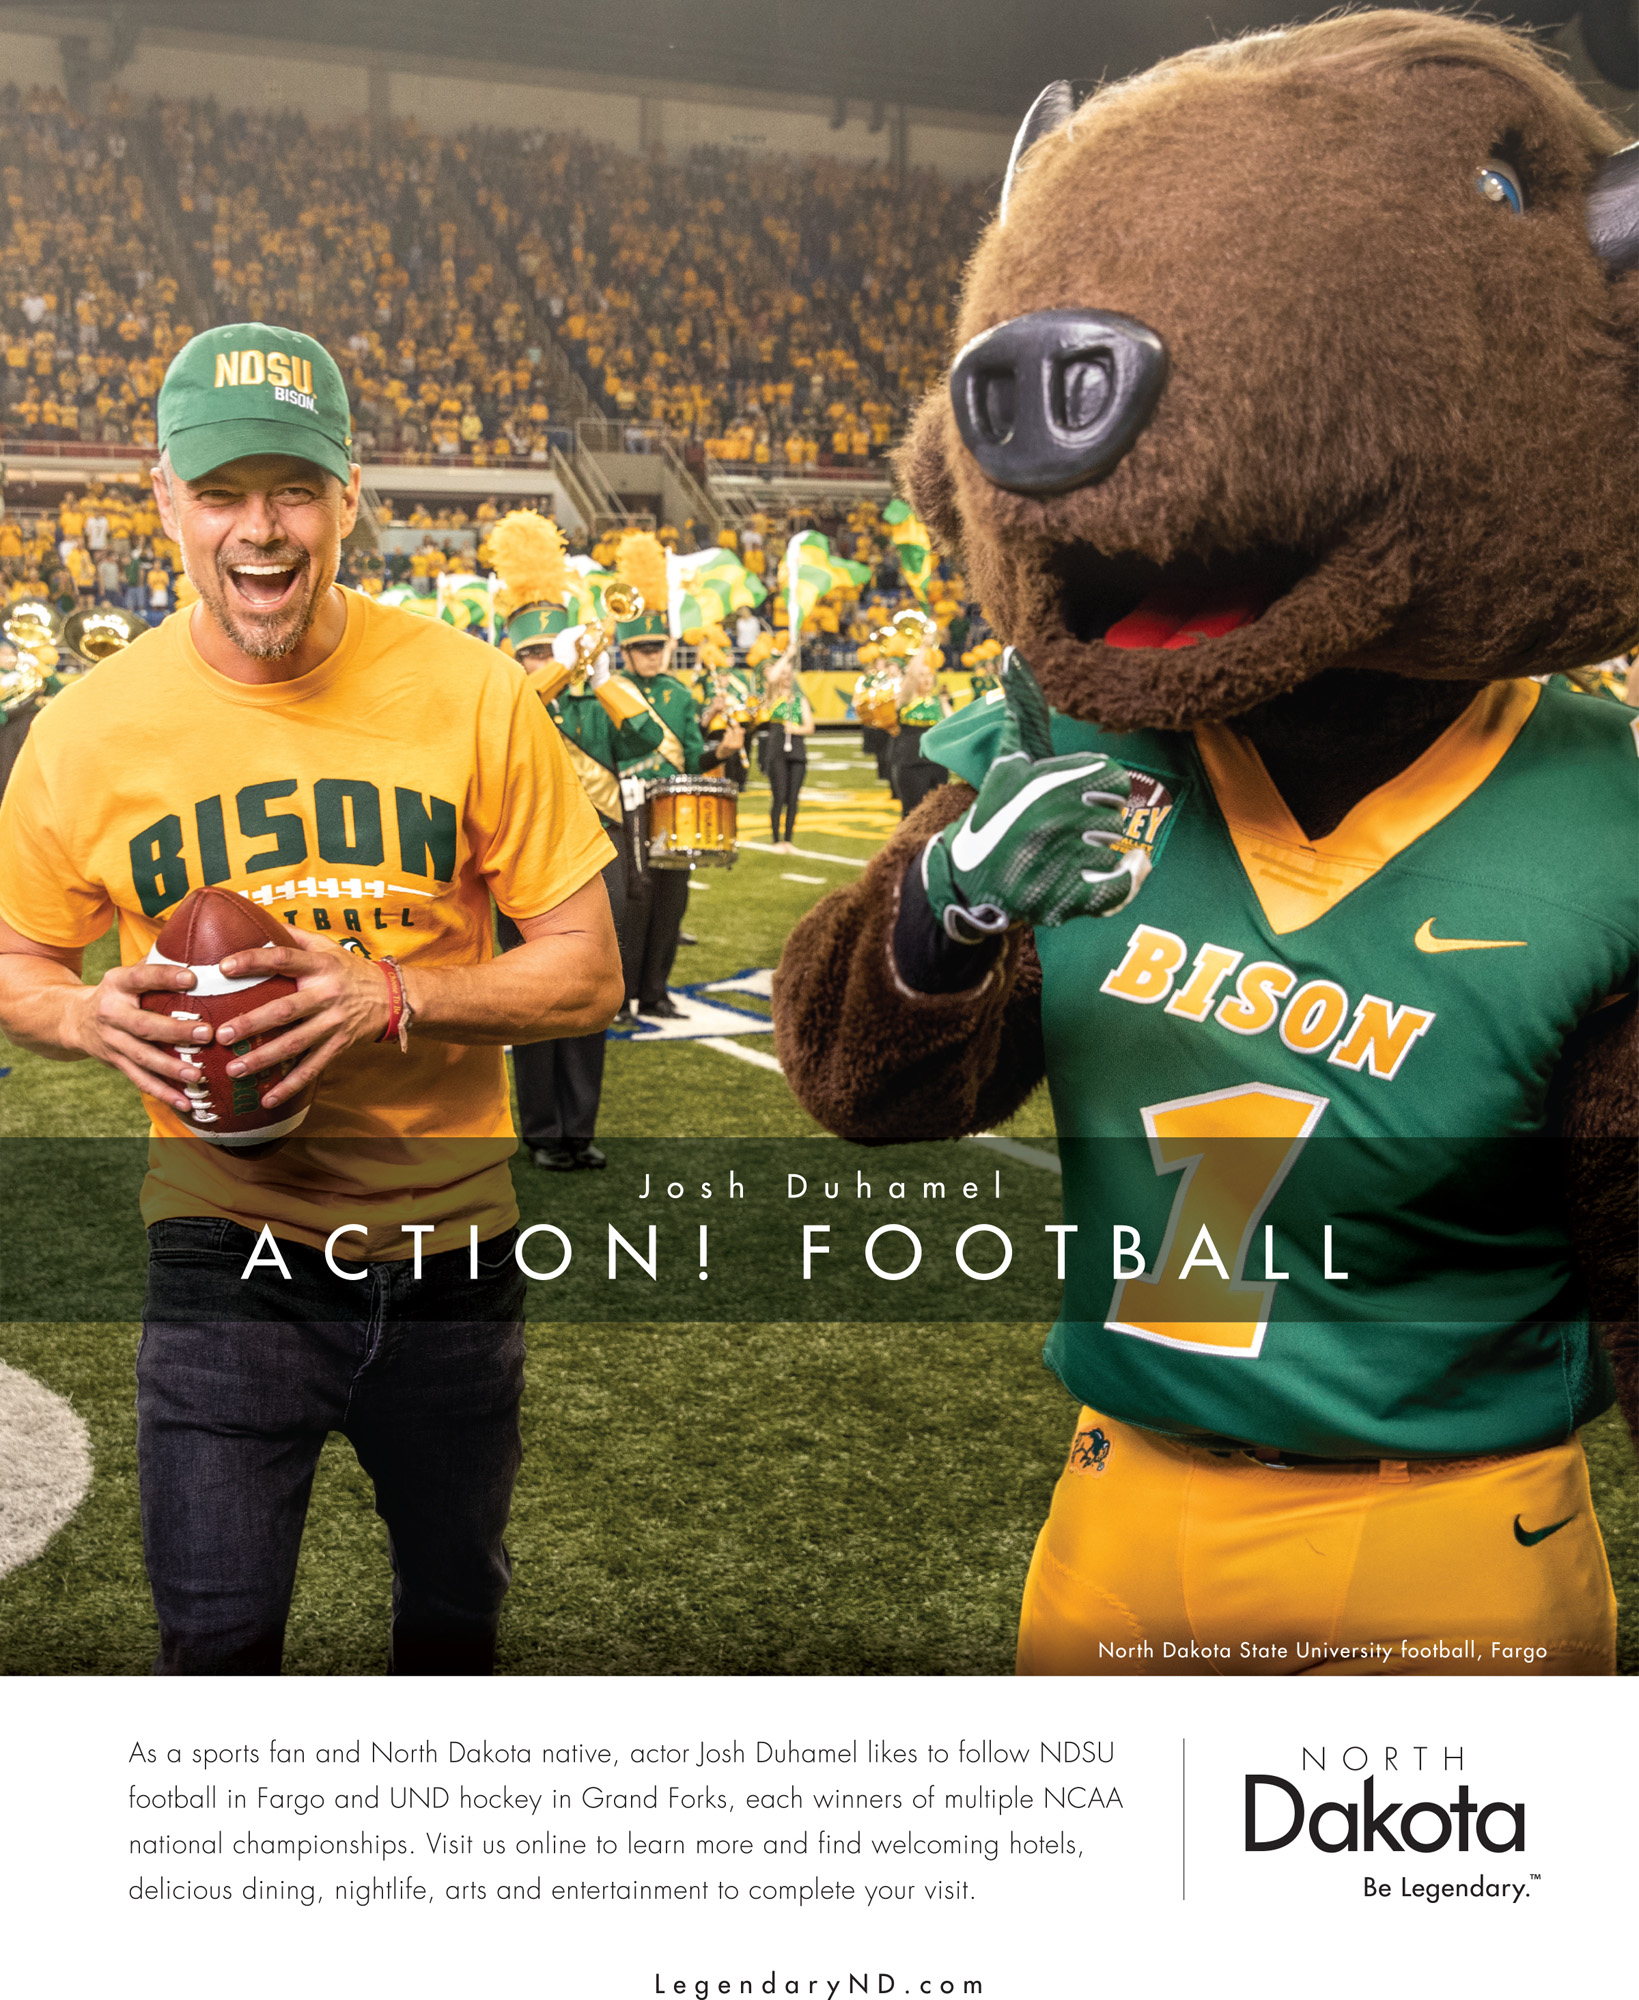 Josh Duhamel holds a football on the field next to the North Dakota State Bisons mascot.